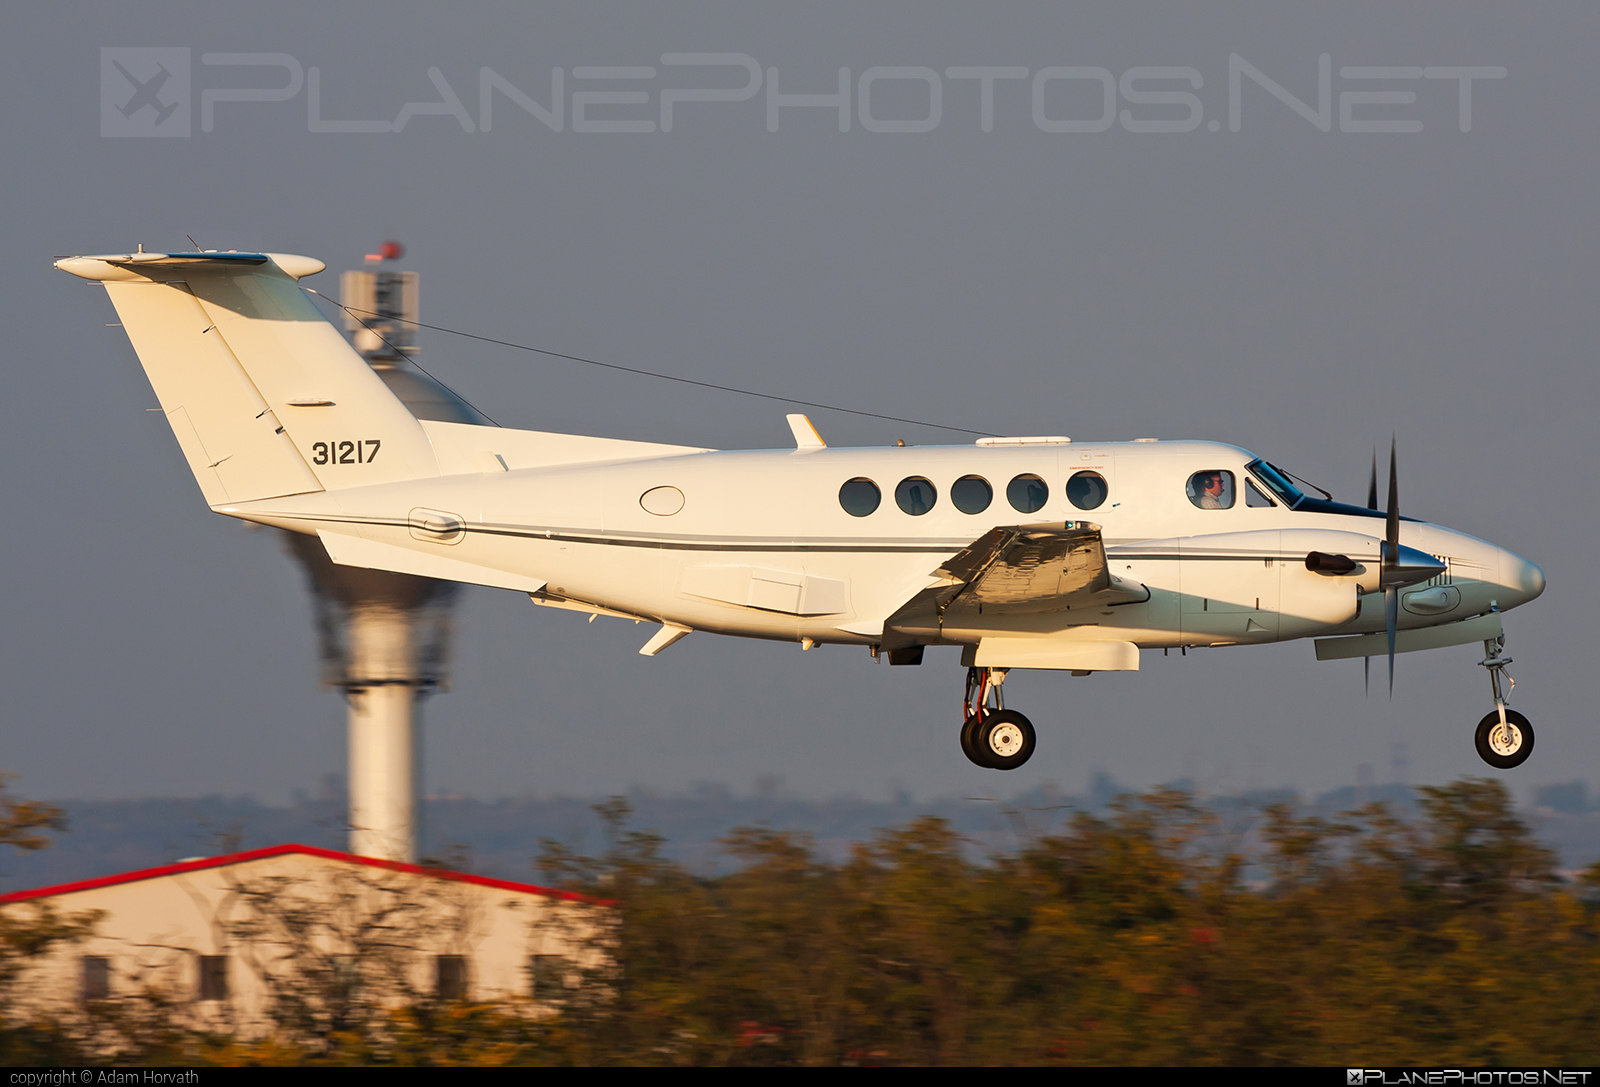 Beechcraft C-12C Huron - 73-1217 operated by US Air Force (USAF) #beechcraft #usaf #usairforce